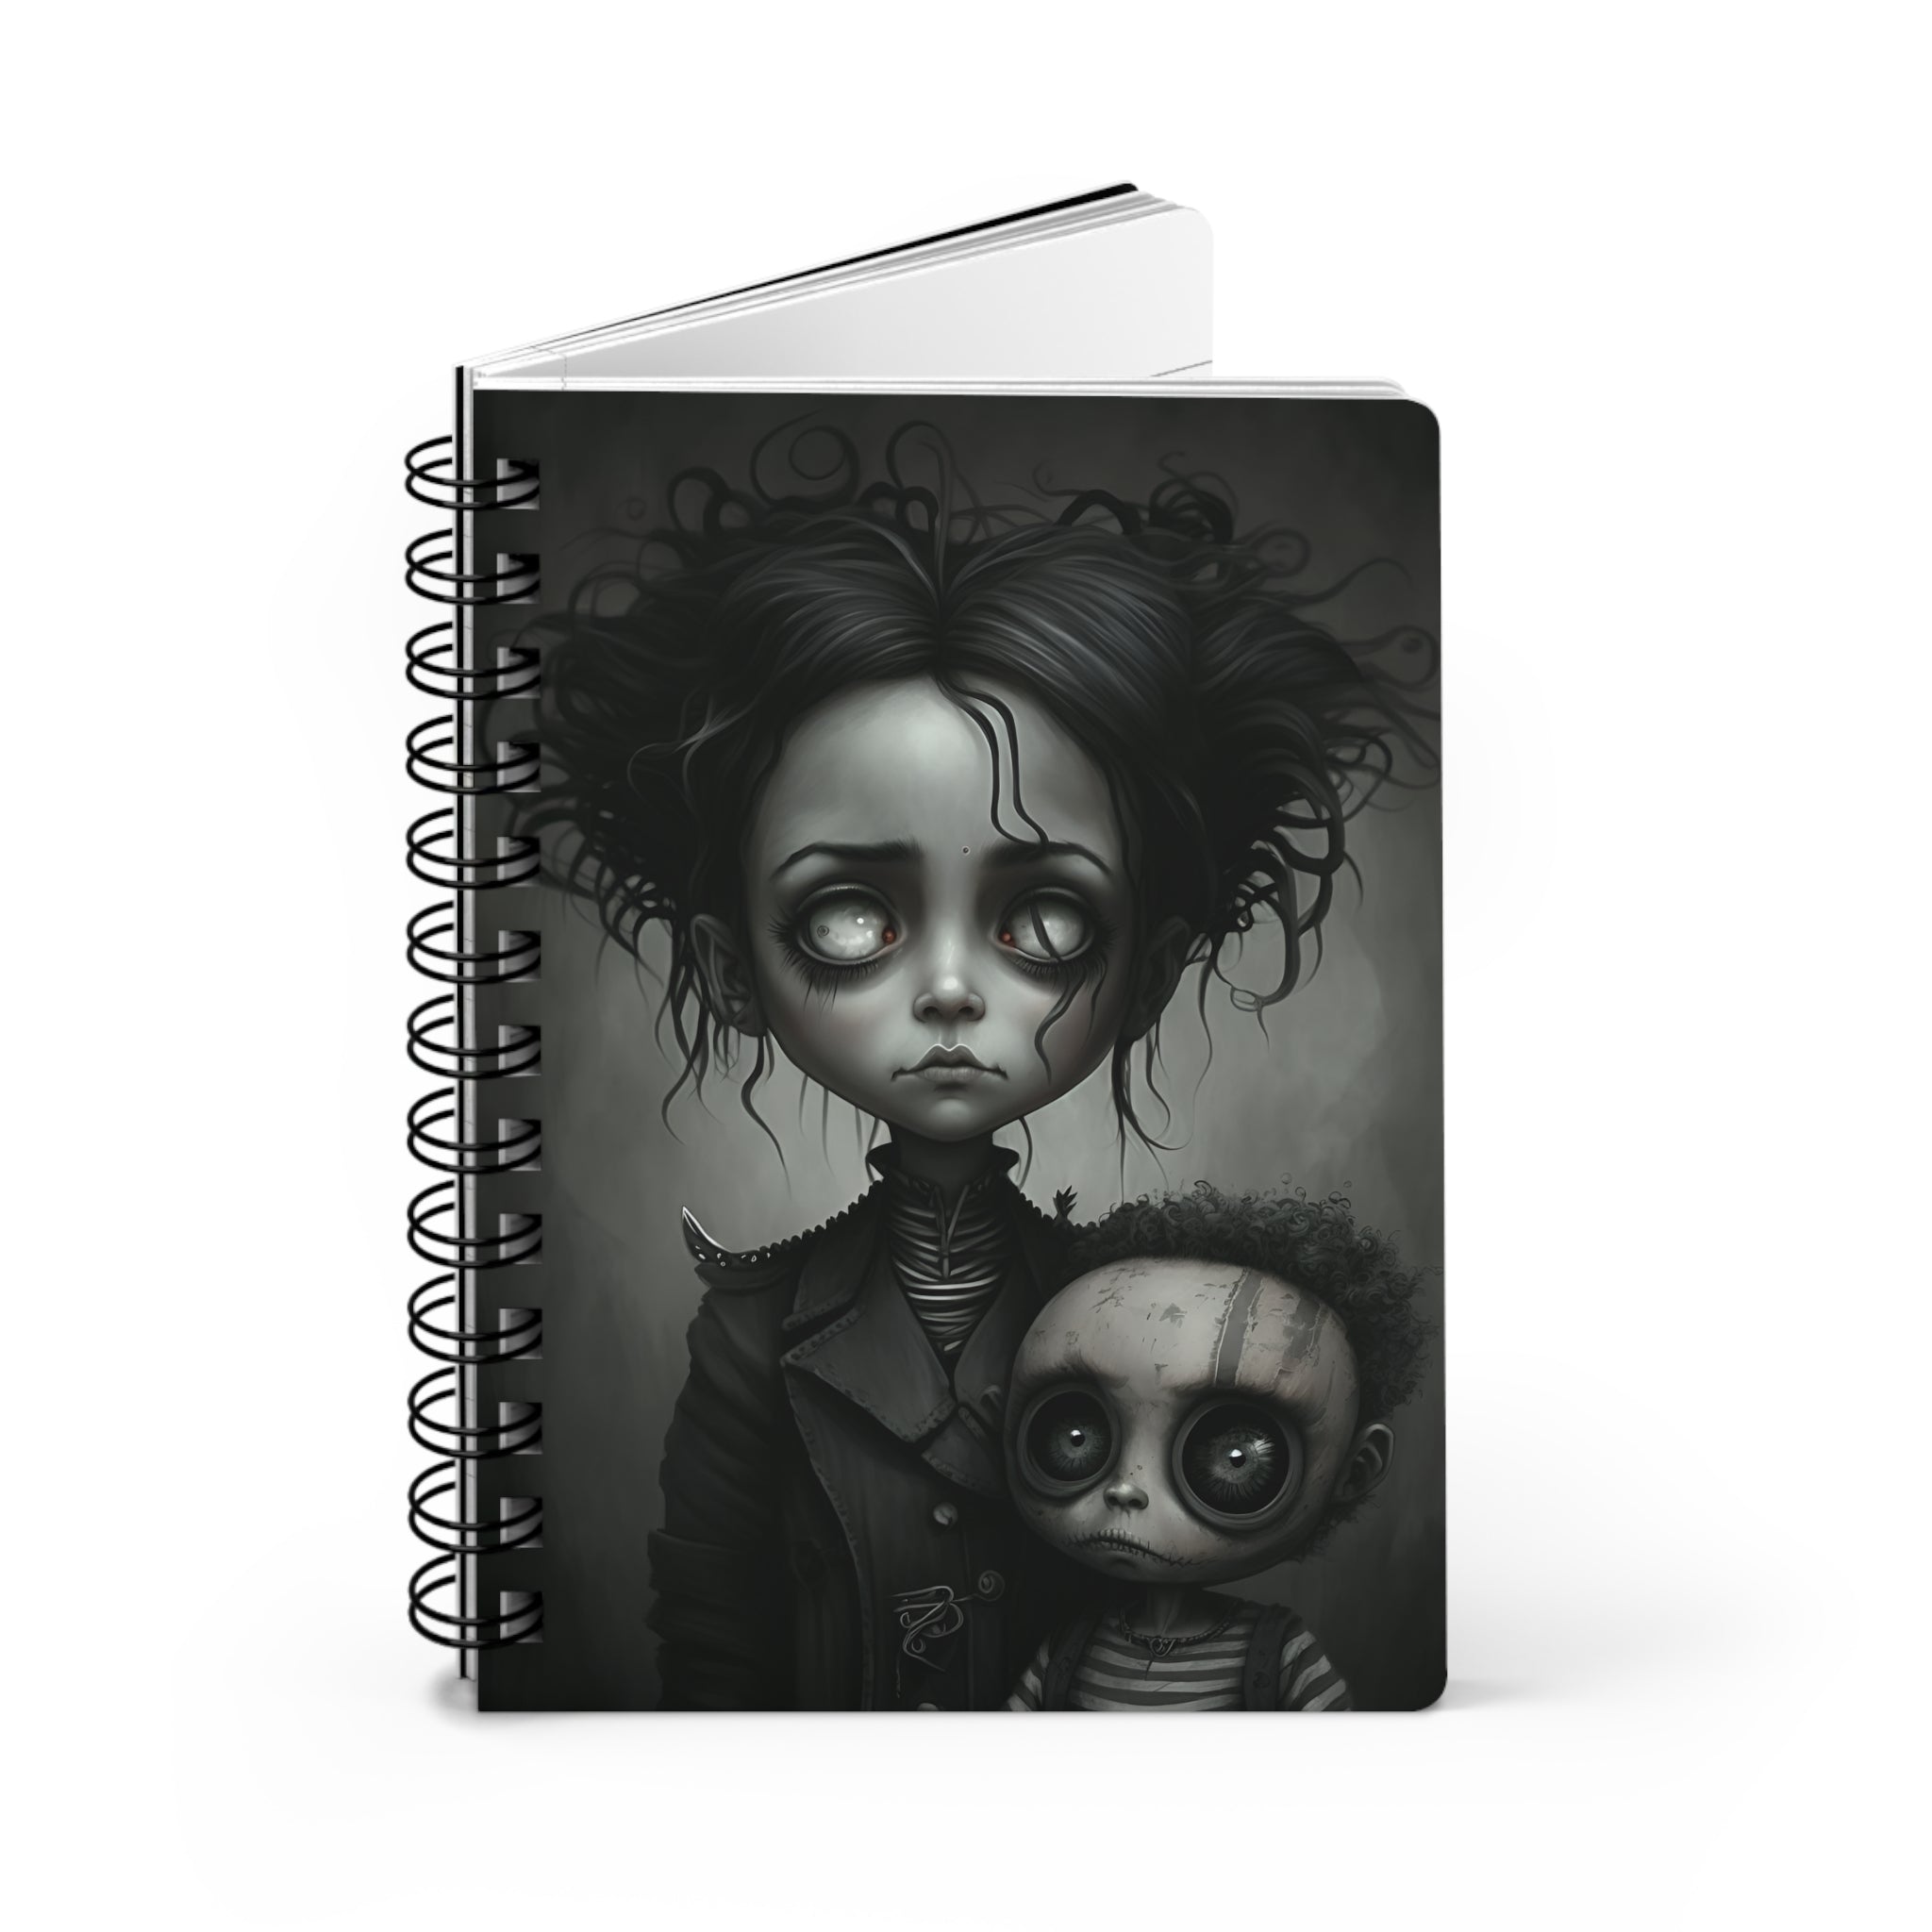 Haunted Innocence Gothic Notebook Spiral Lined 5x7